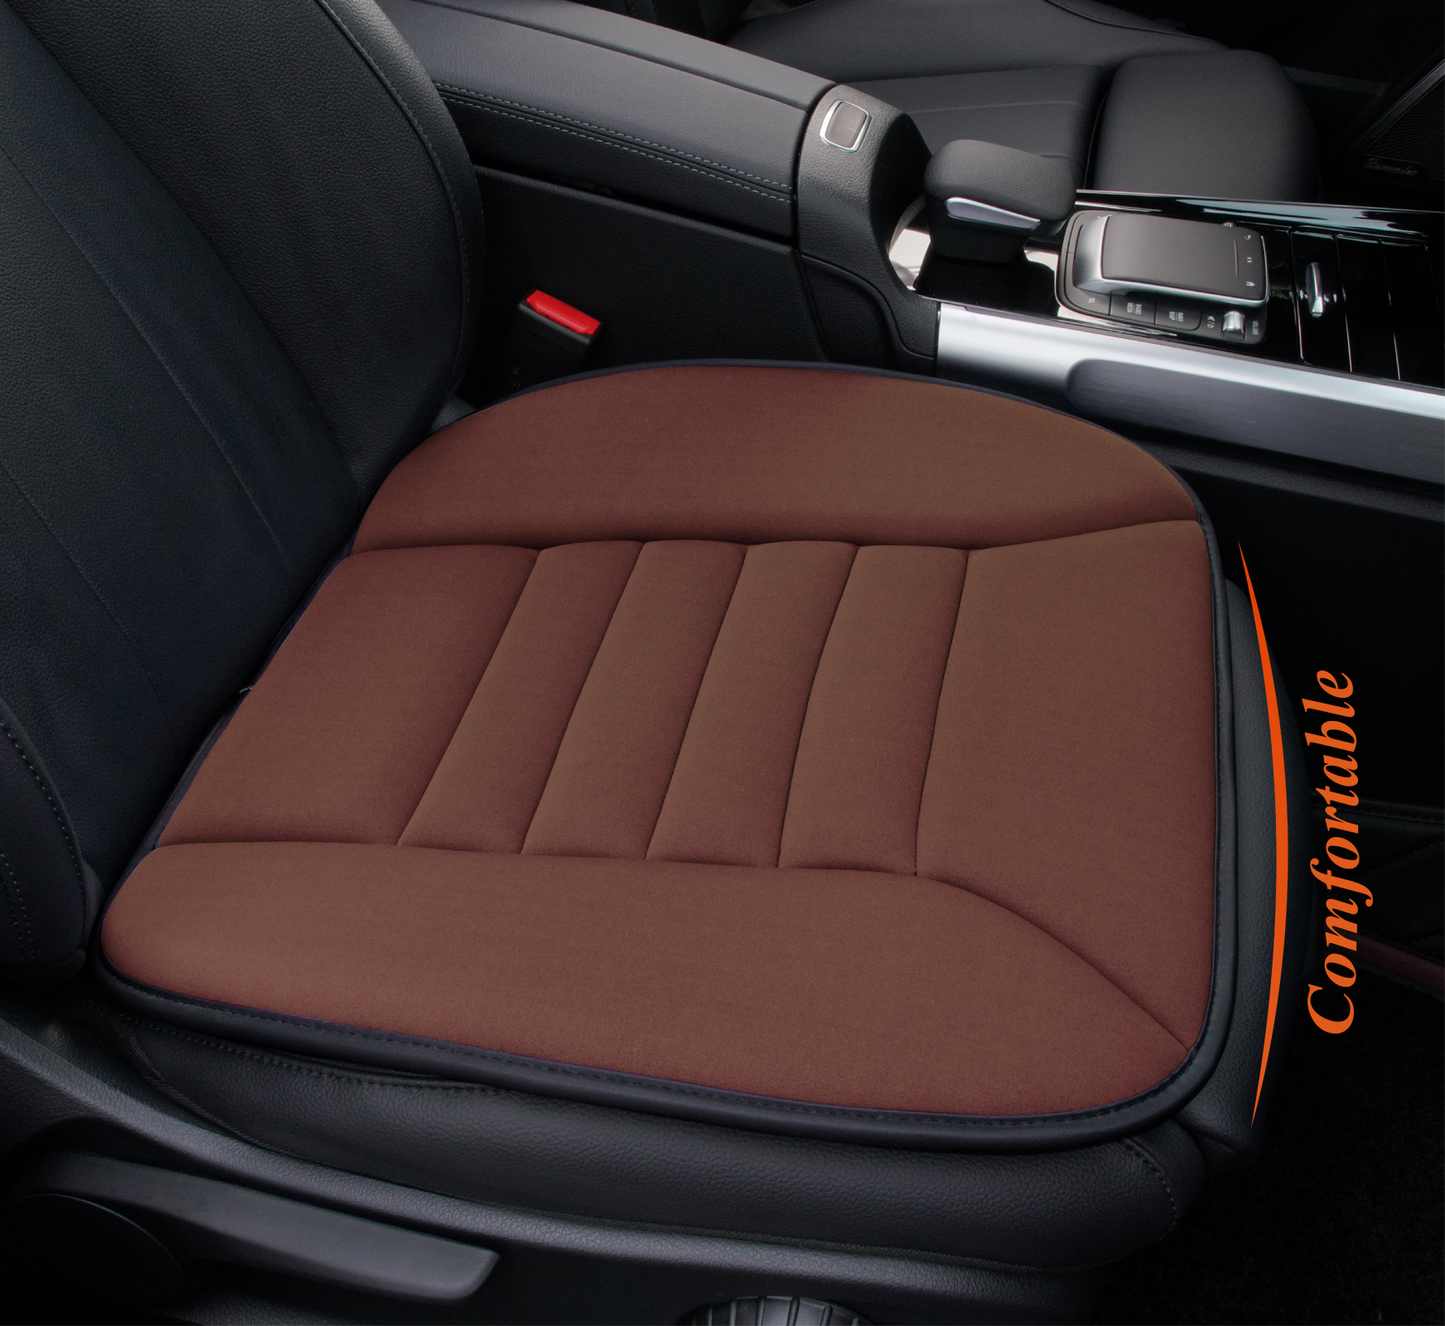 kingphenix Car Seat Cushion with 1.2inch Comfort Memory Foam, Seat Cushion for Car and Office Chair (Black)